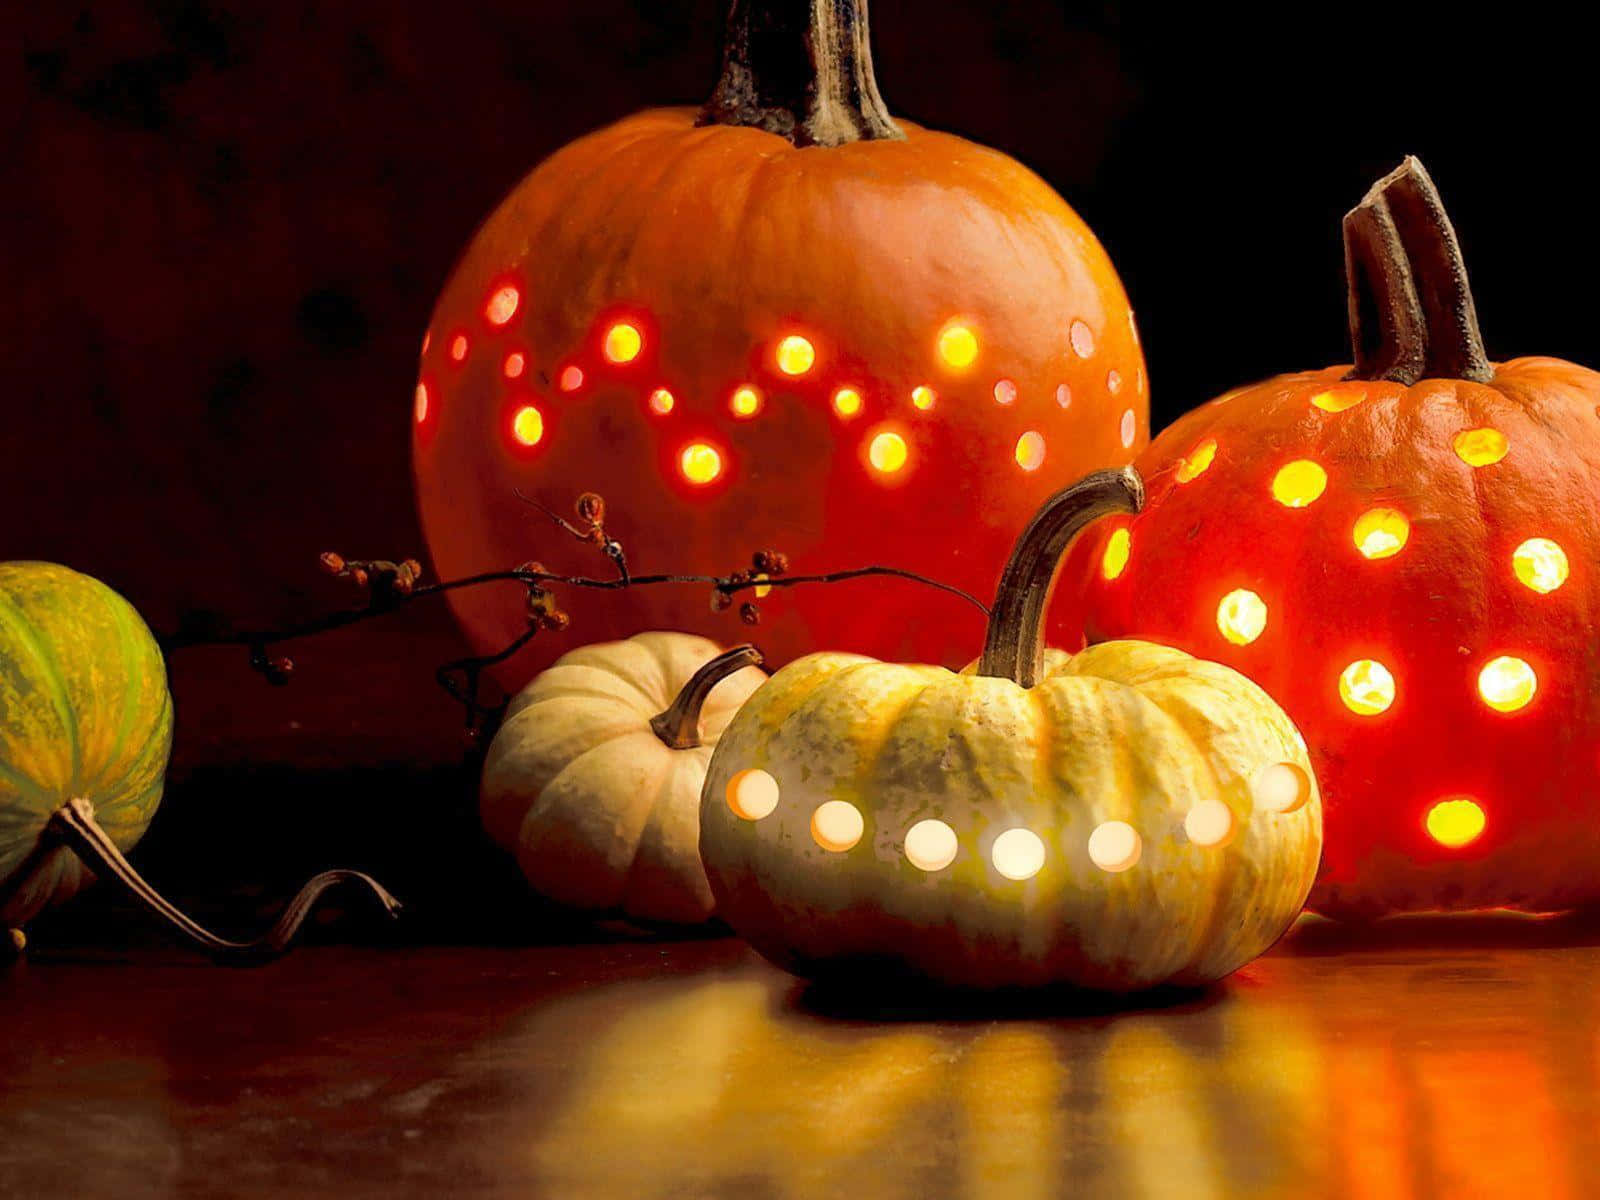 "Welcome the Fall Season With This Festive Pumpkin Decoration" Wallpaper